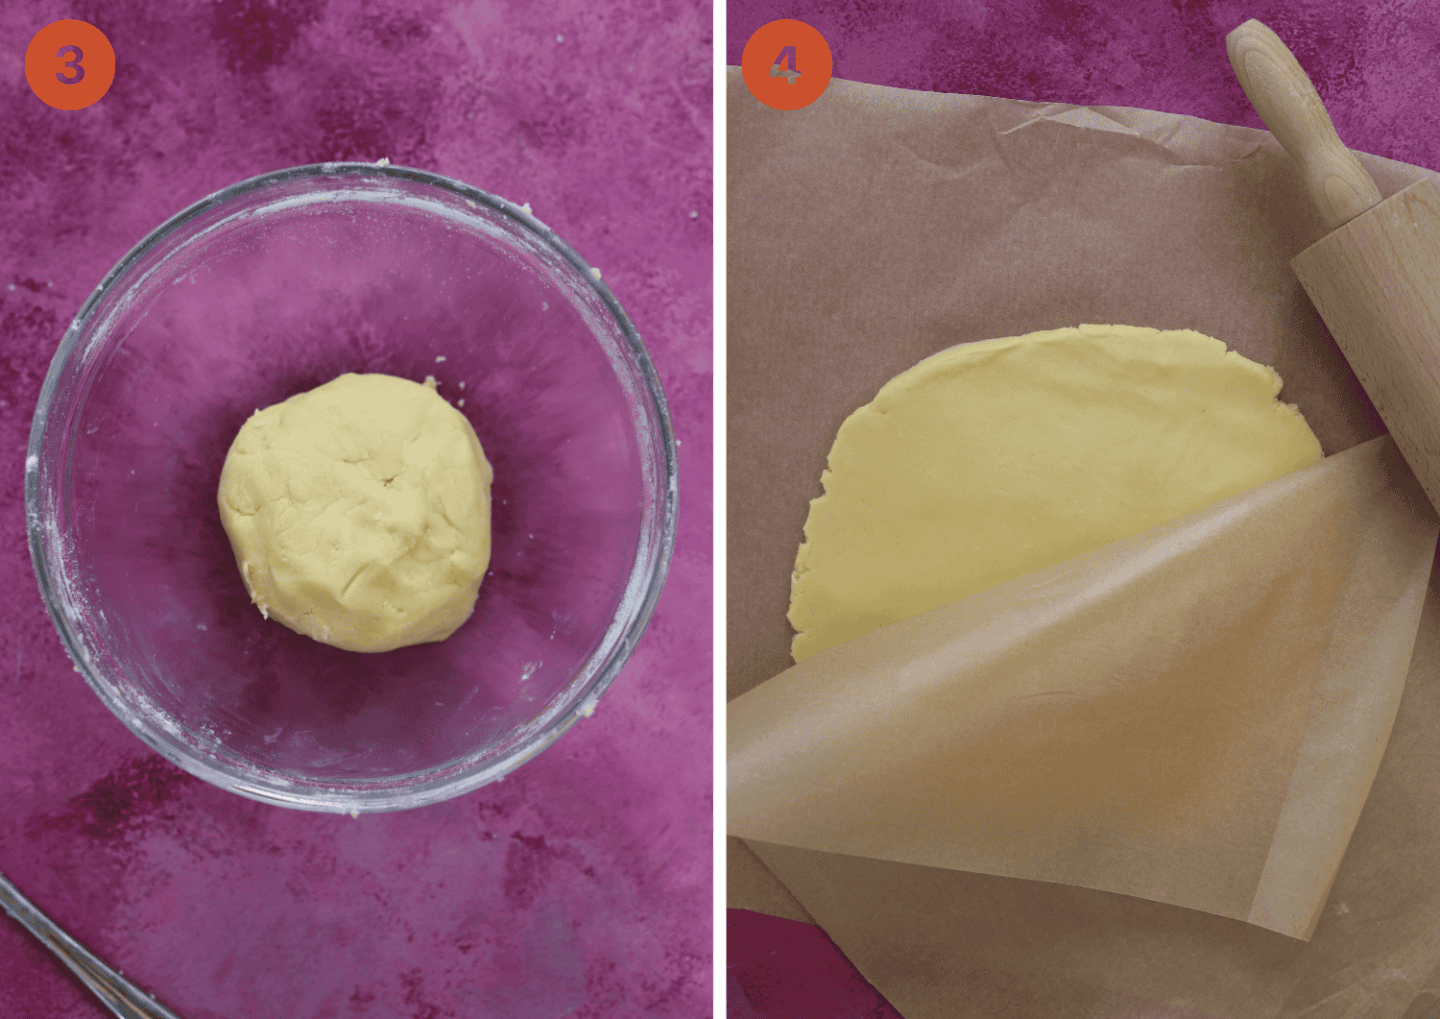 Mix the shortbread dough into a ball, then roll out between baking paper sheets.